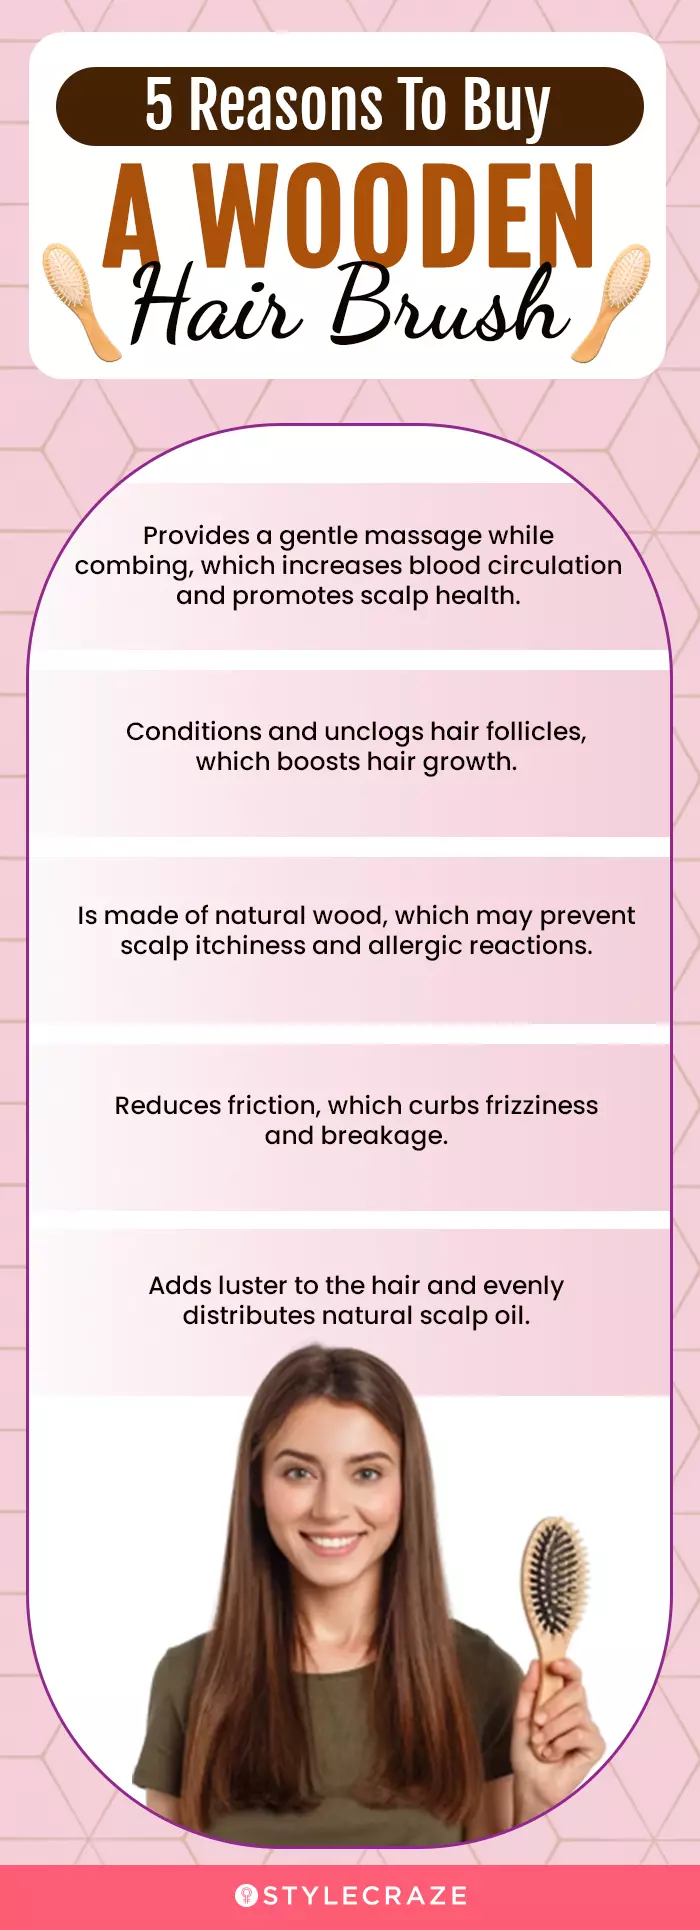 5 reasons to buy a wooden hair brush (infographic)